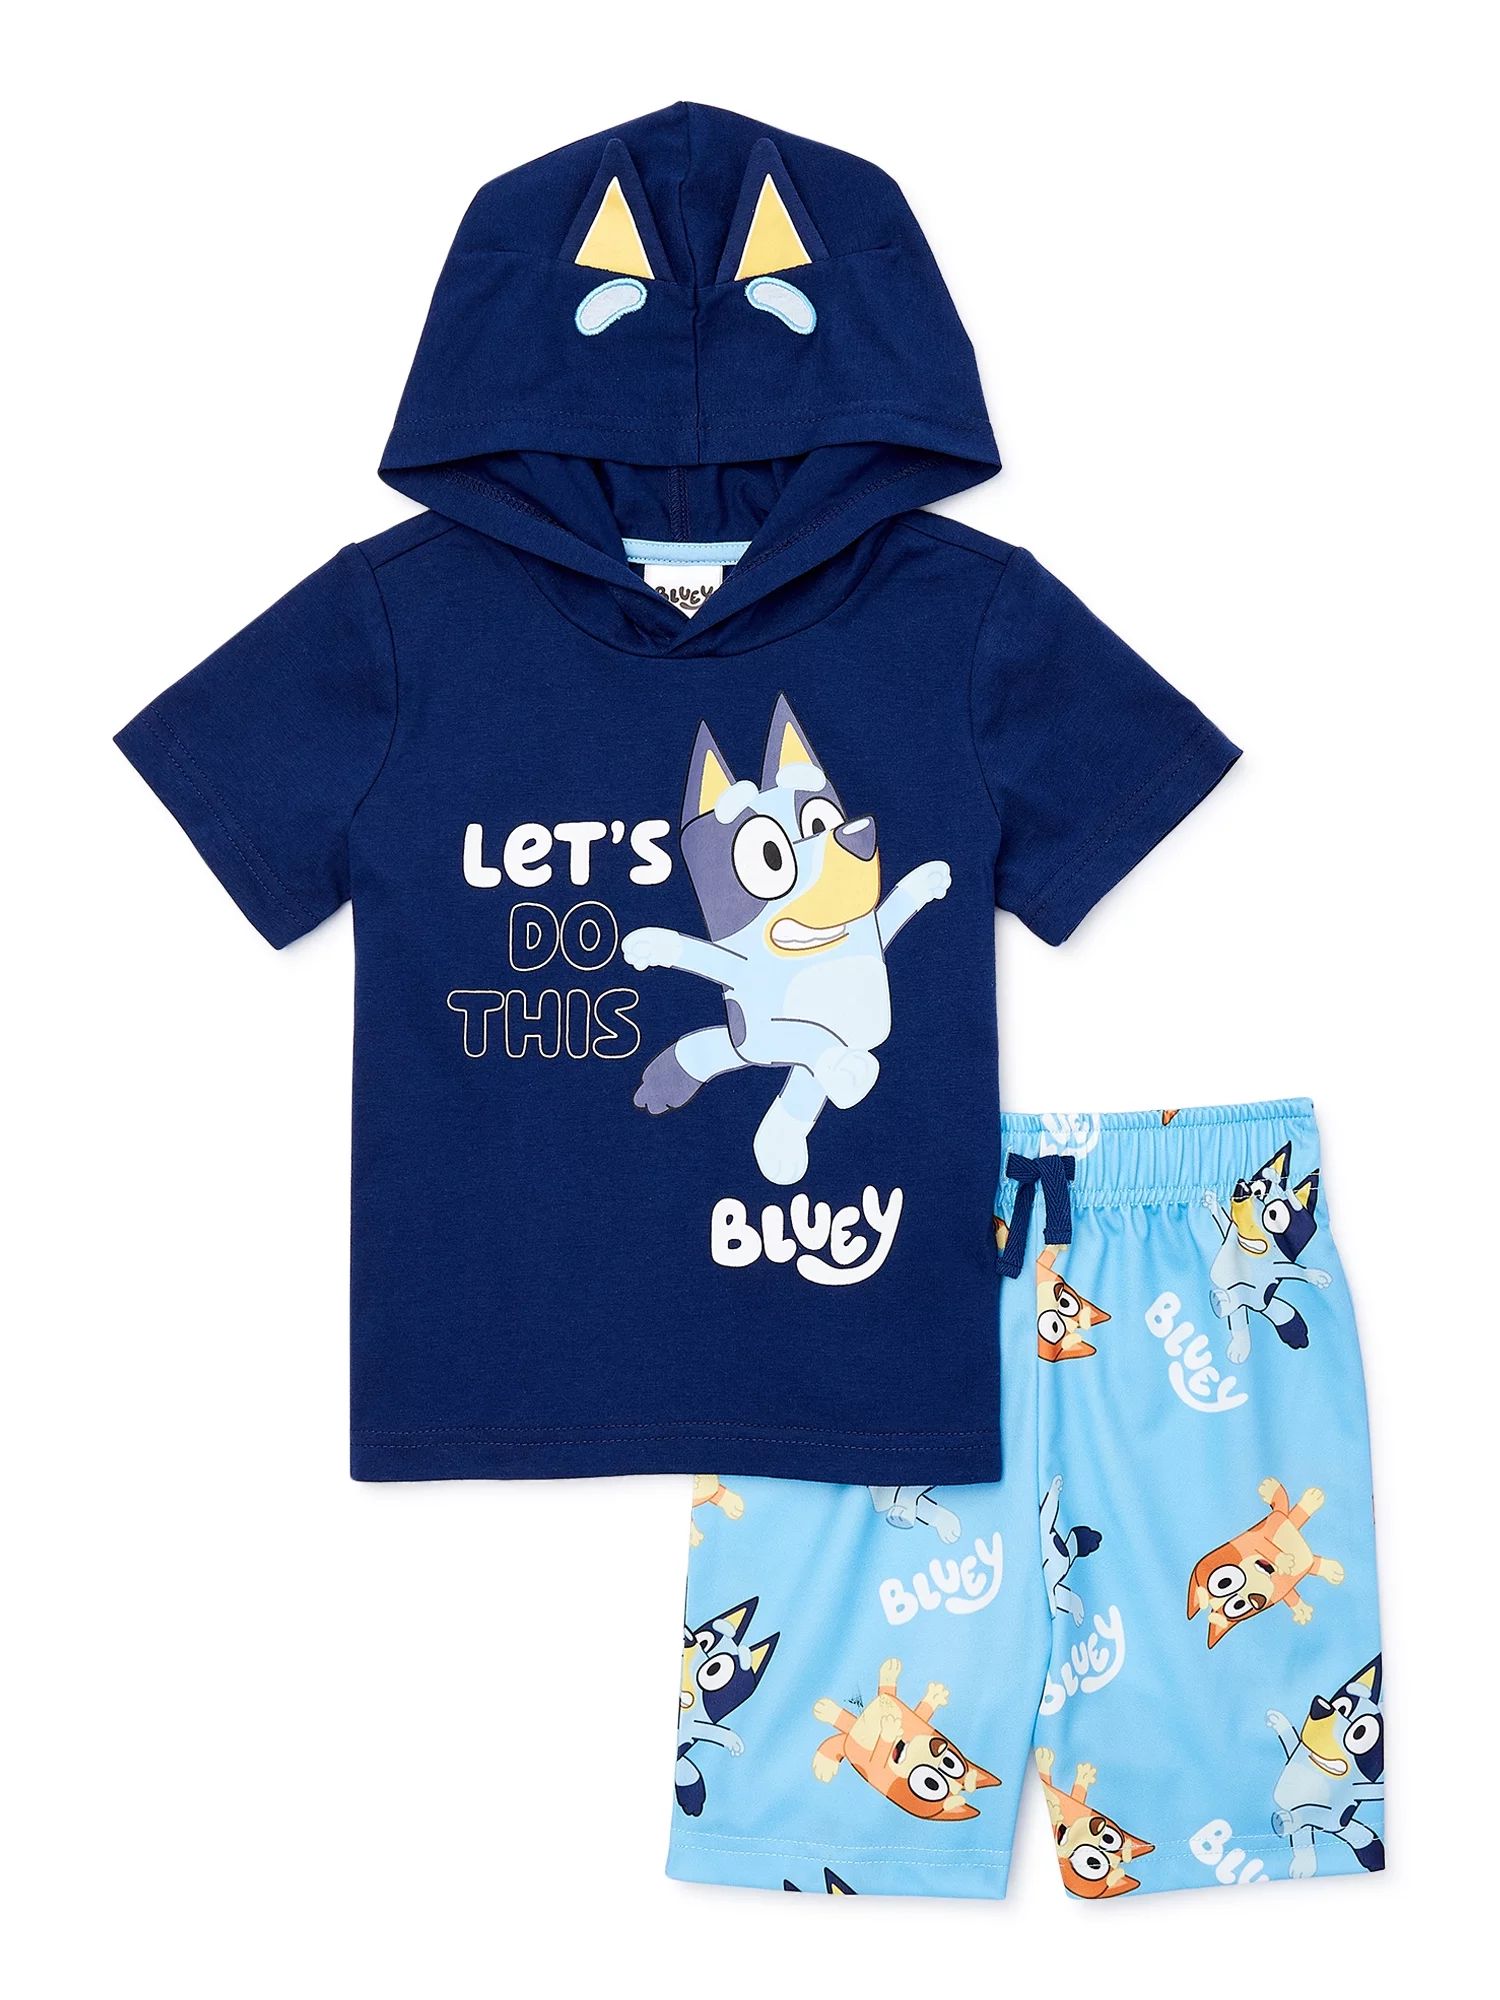 Bluey Toddler Boys Cosplay Hooded Top and Shorts Set, 2-Piece, Sizes 2T-5T | Walmart (US)